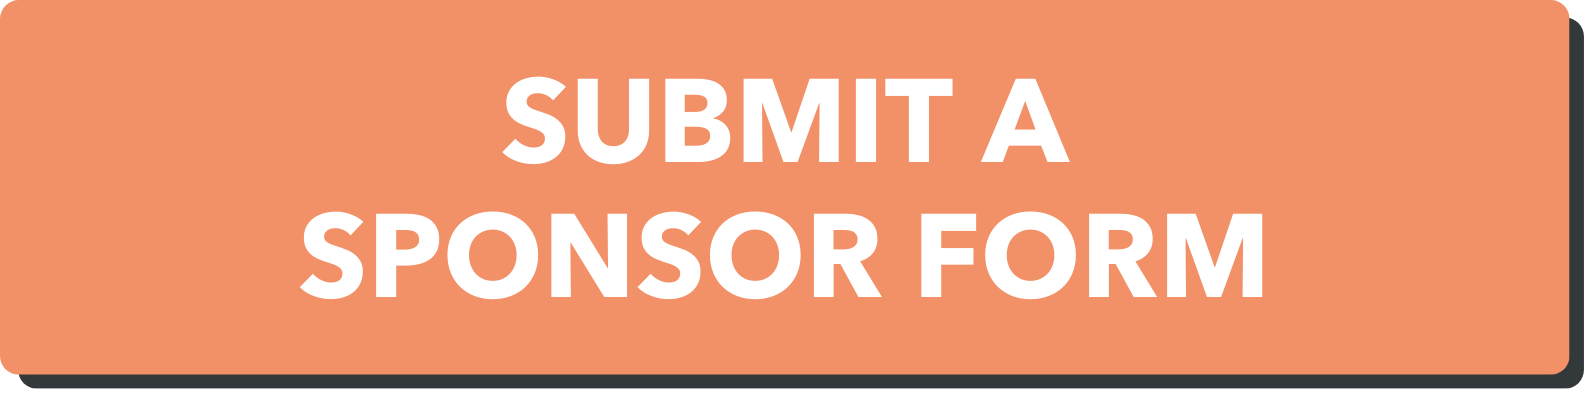 SUBMIT A SPONSOR FORM